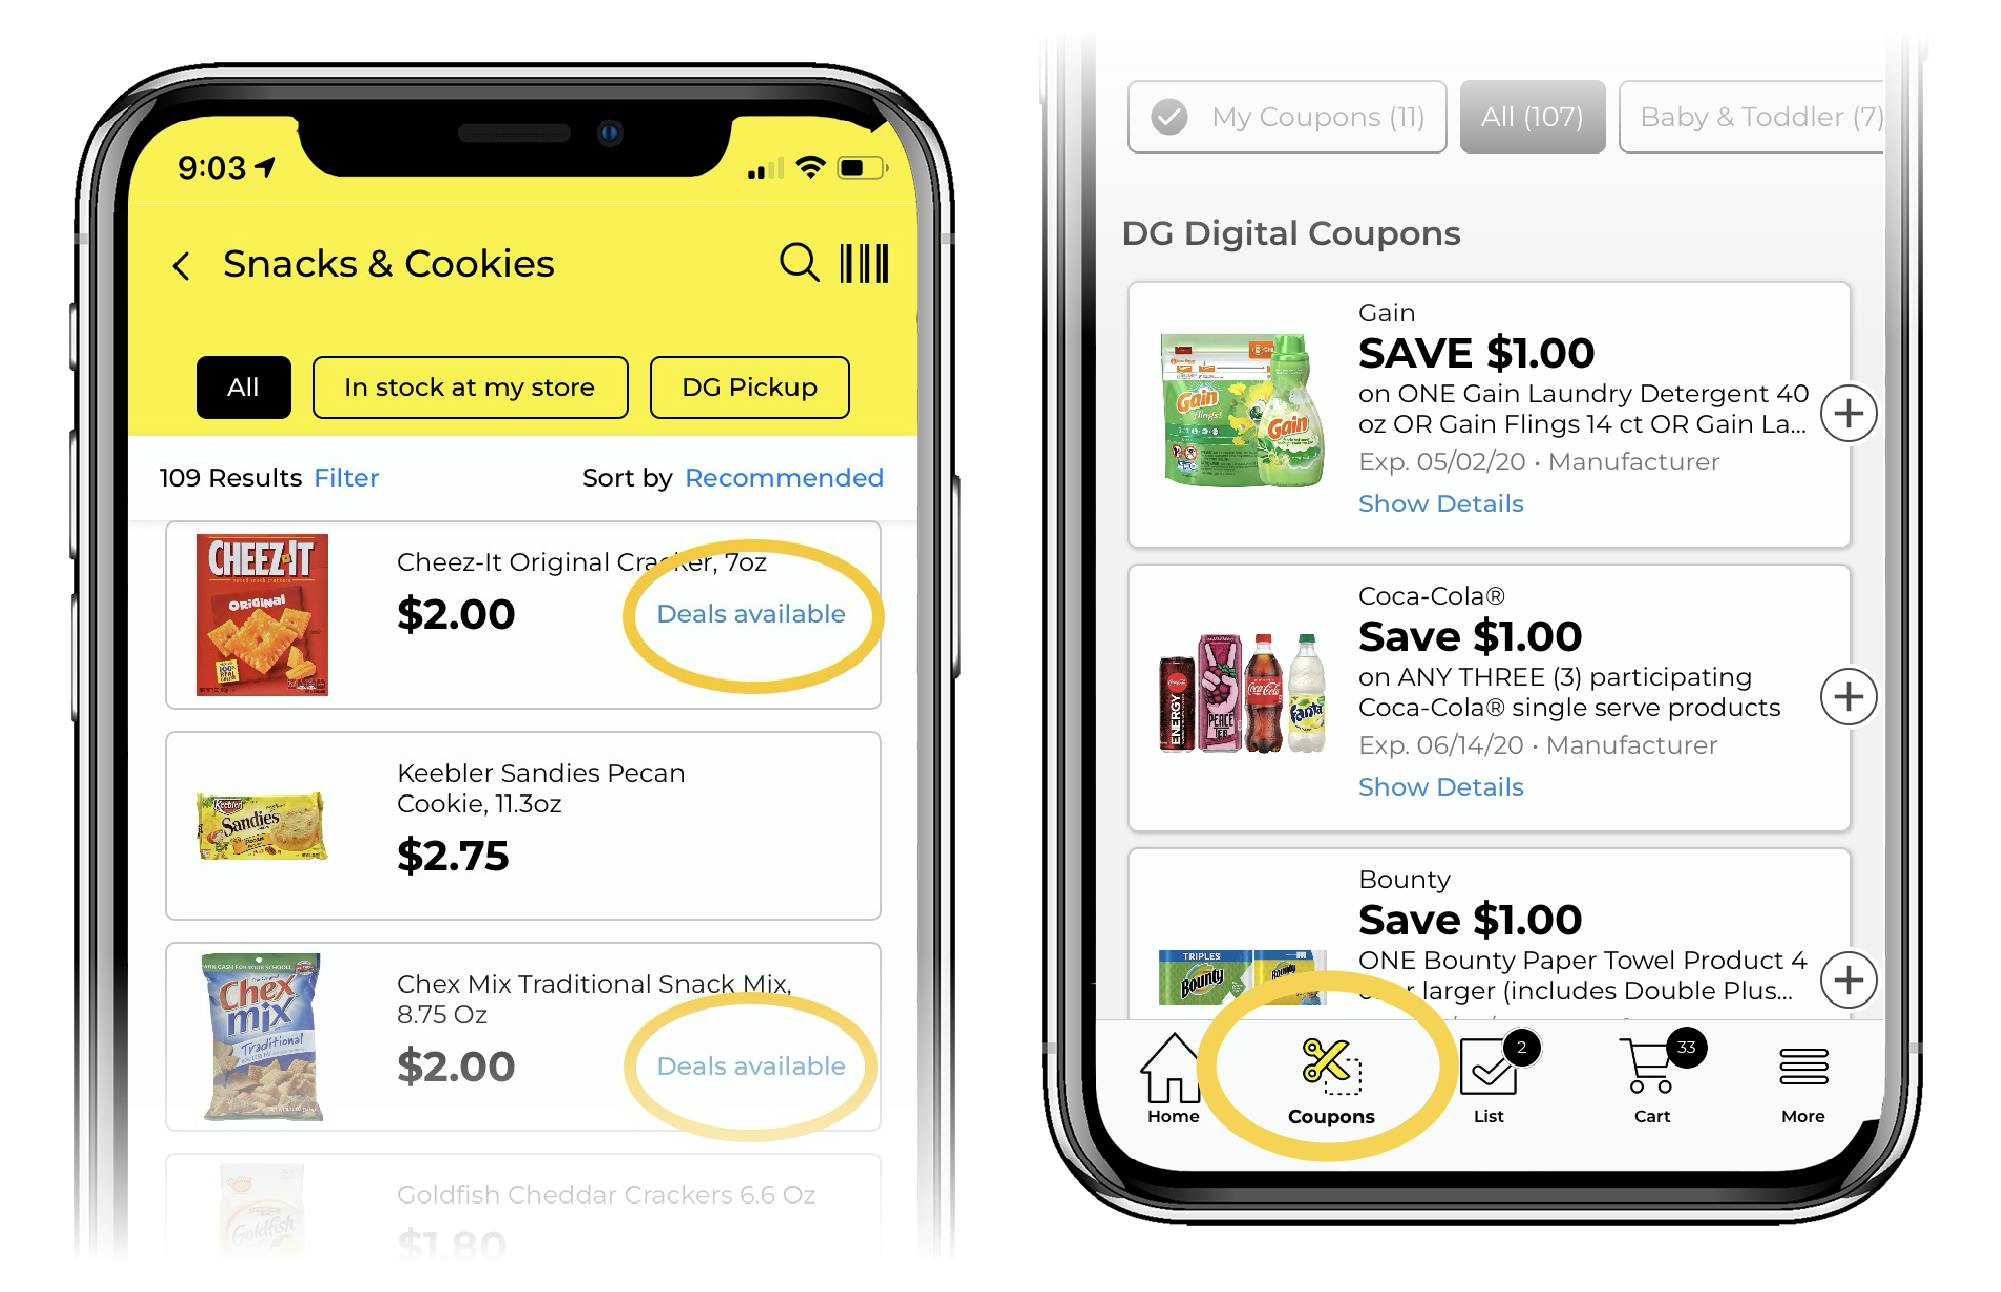 phone screen shows food items with deals available written next to them and coupons icon circled